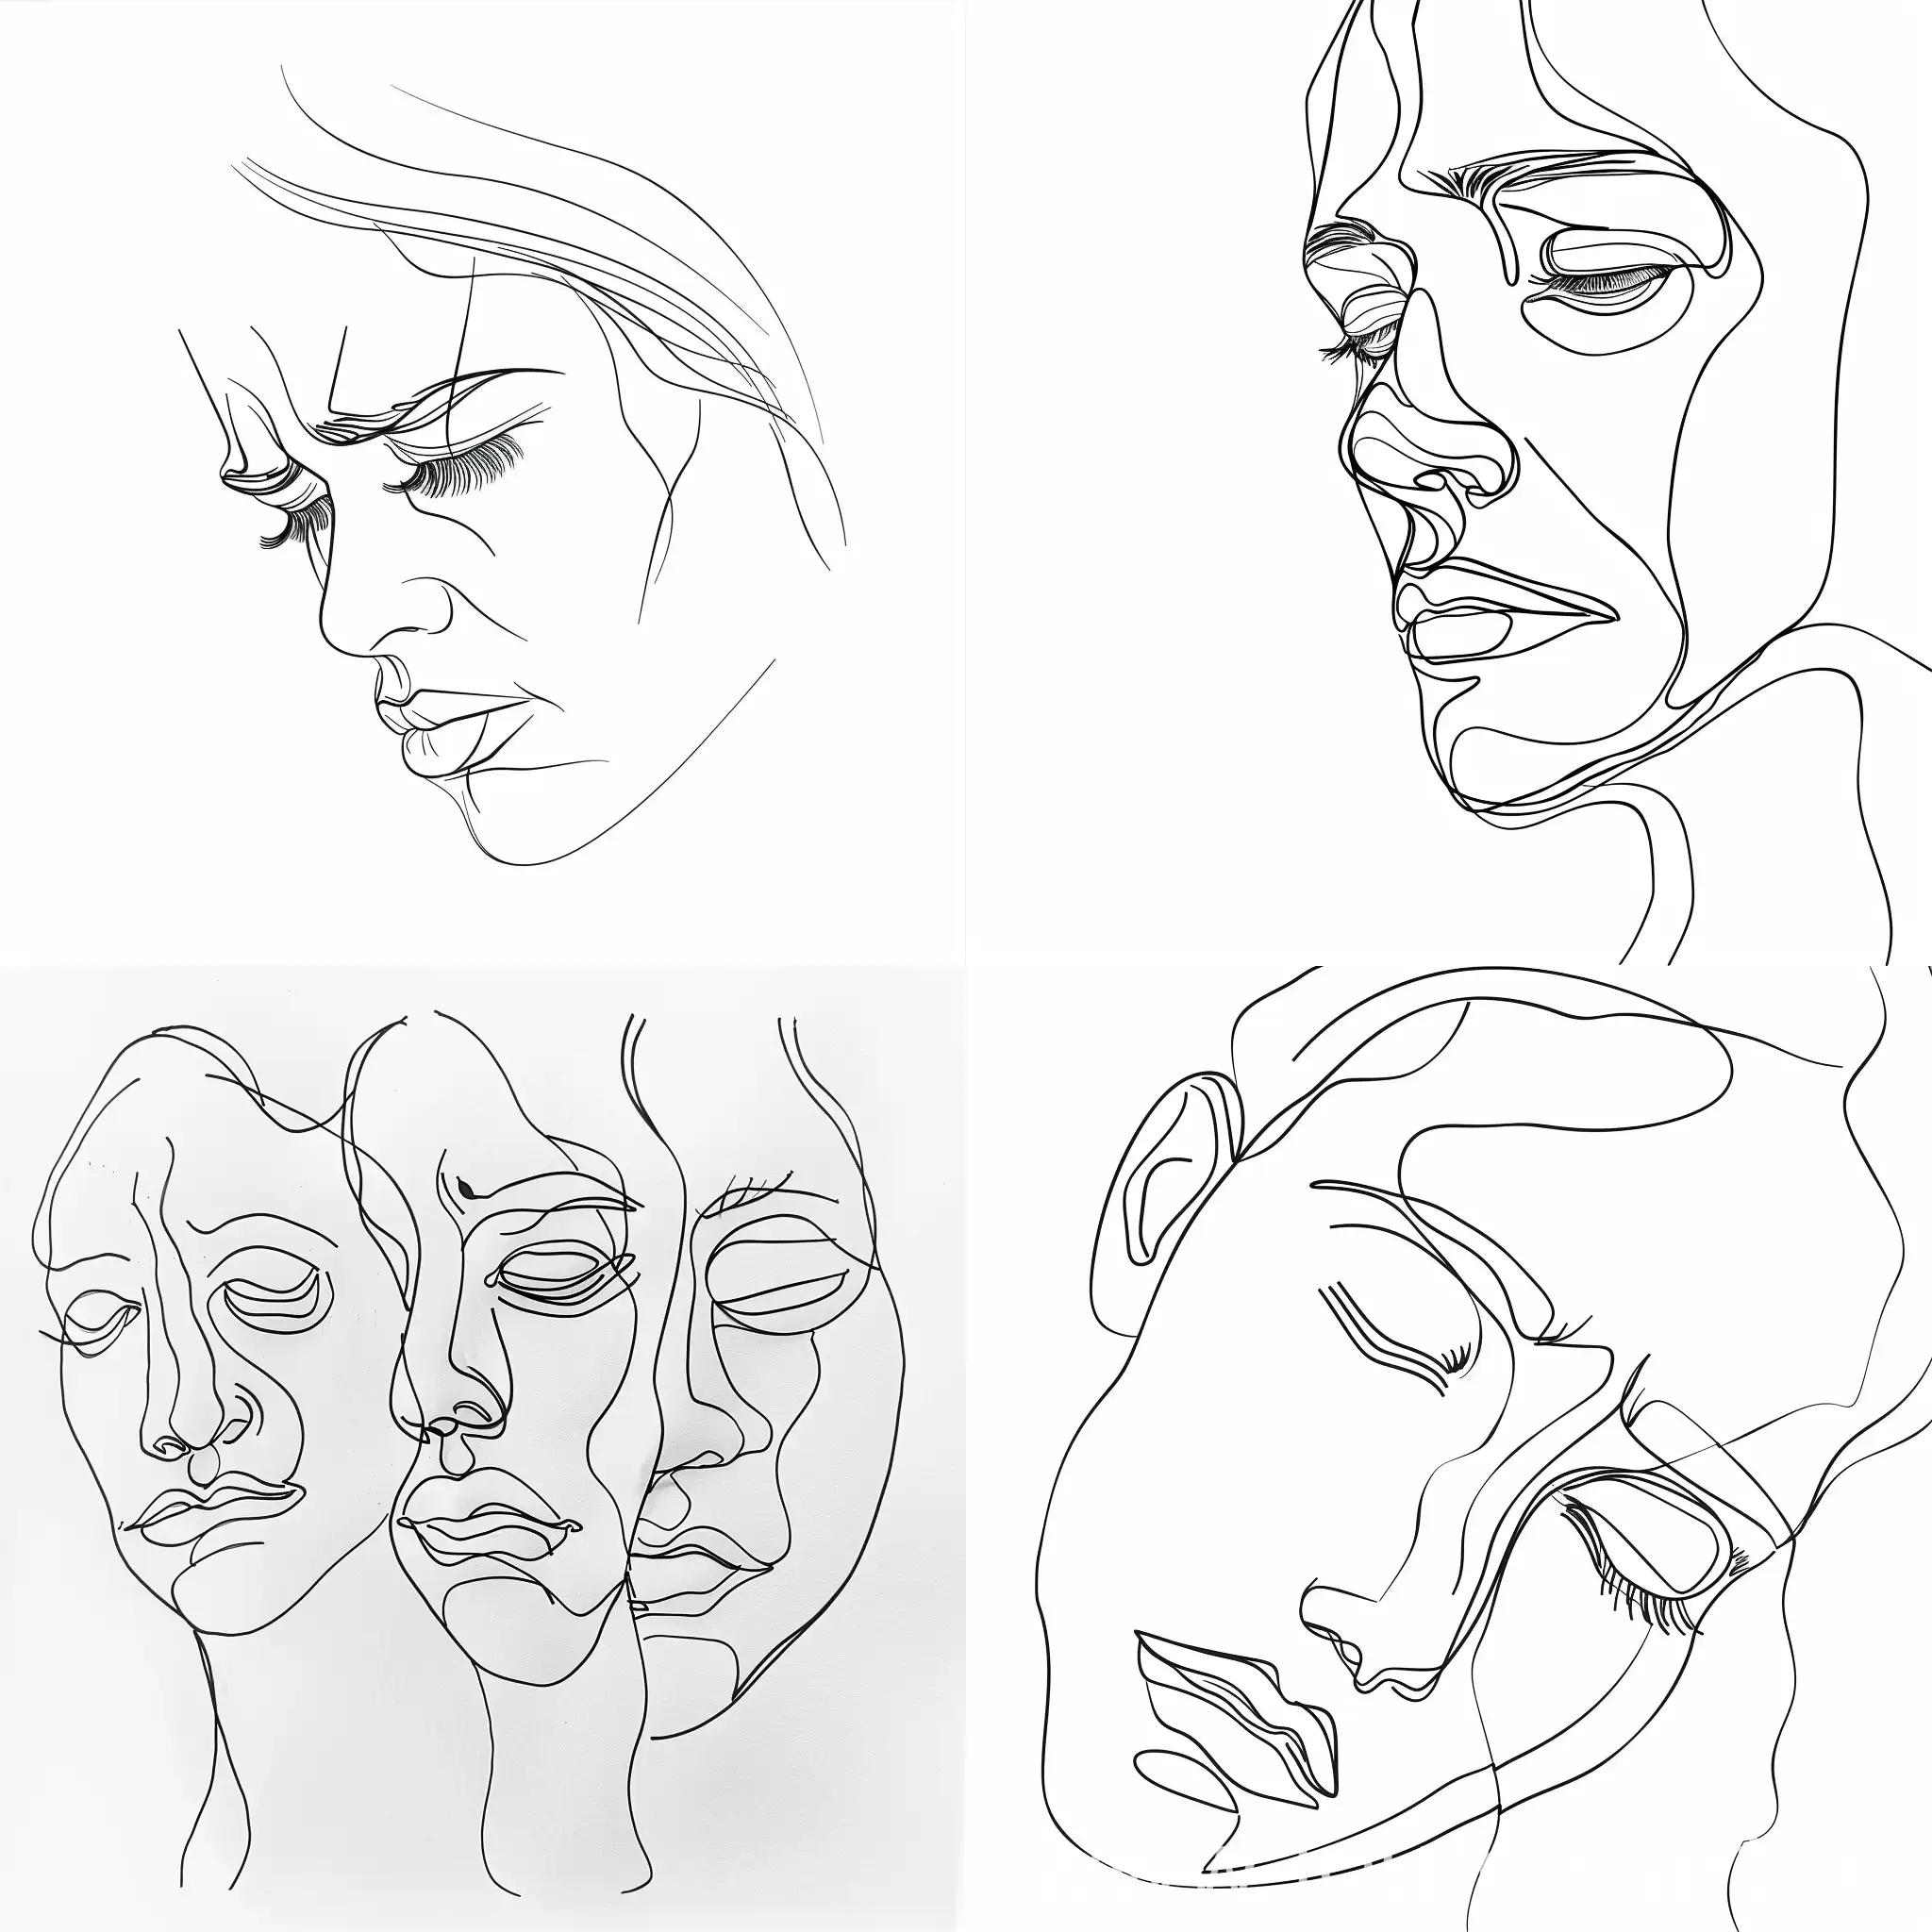 Minimalistic-Sorrowful-Expression-Pack-with-Black-Lines-on-White-Background